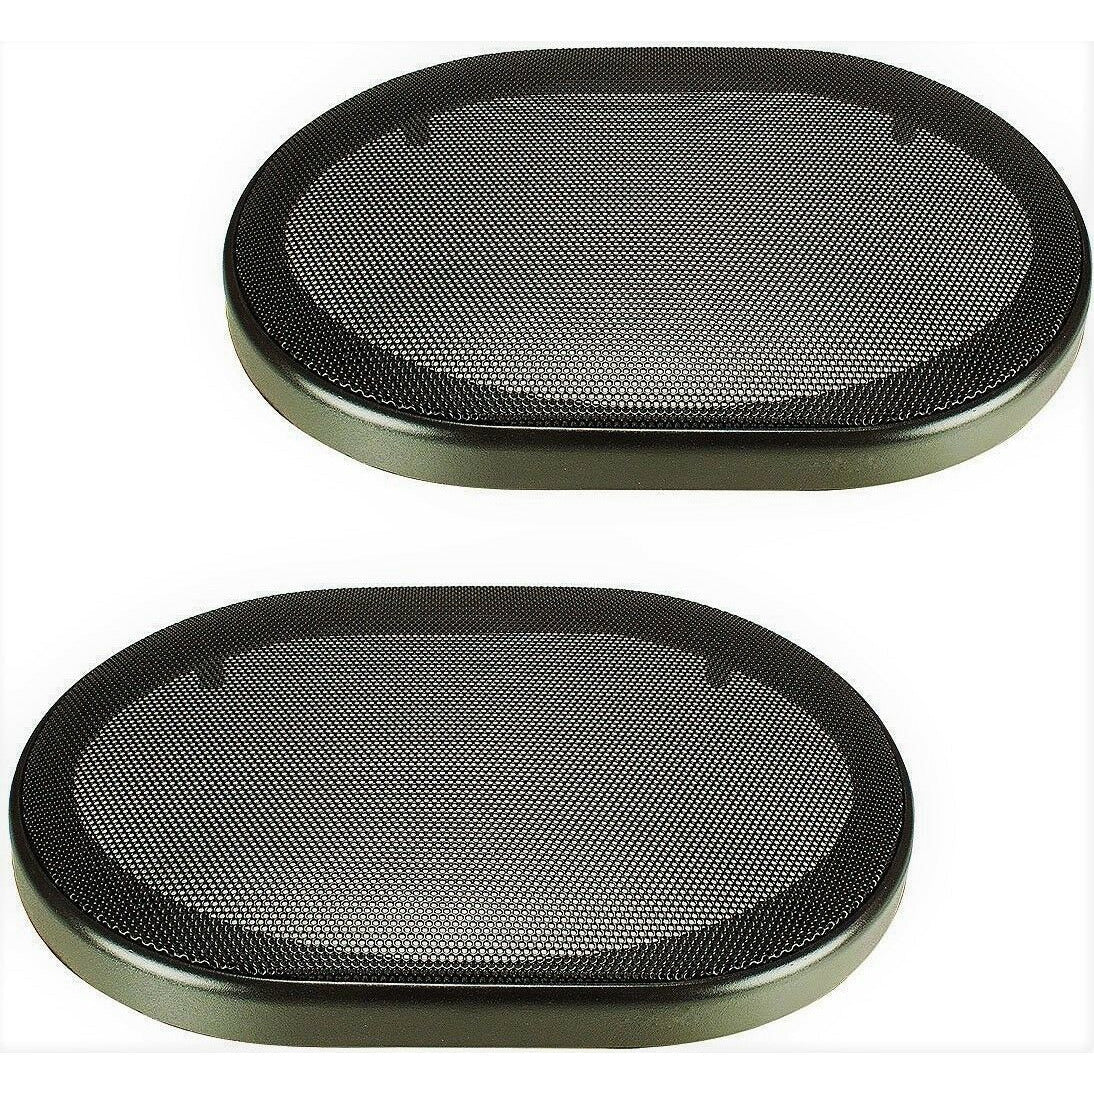 (2) Patron Universal 6"x9" Speaker COAXIAL Component Protective Grills Covers